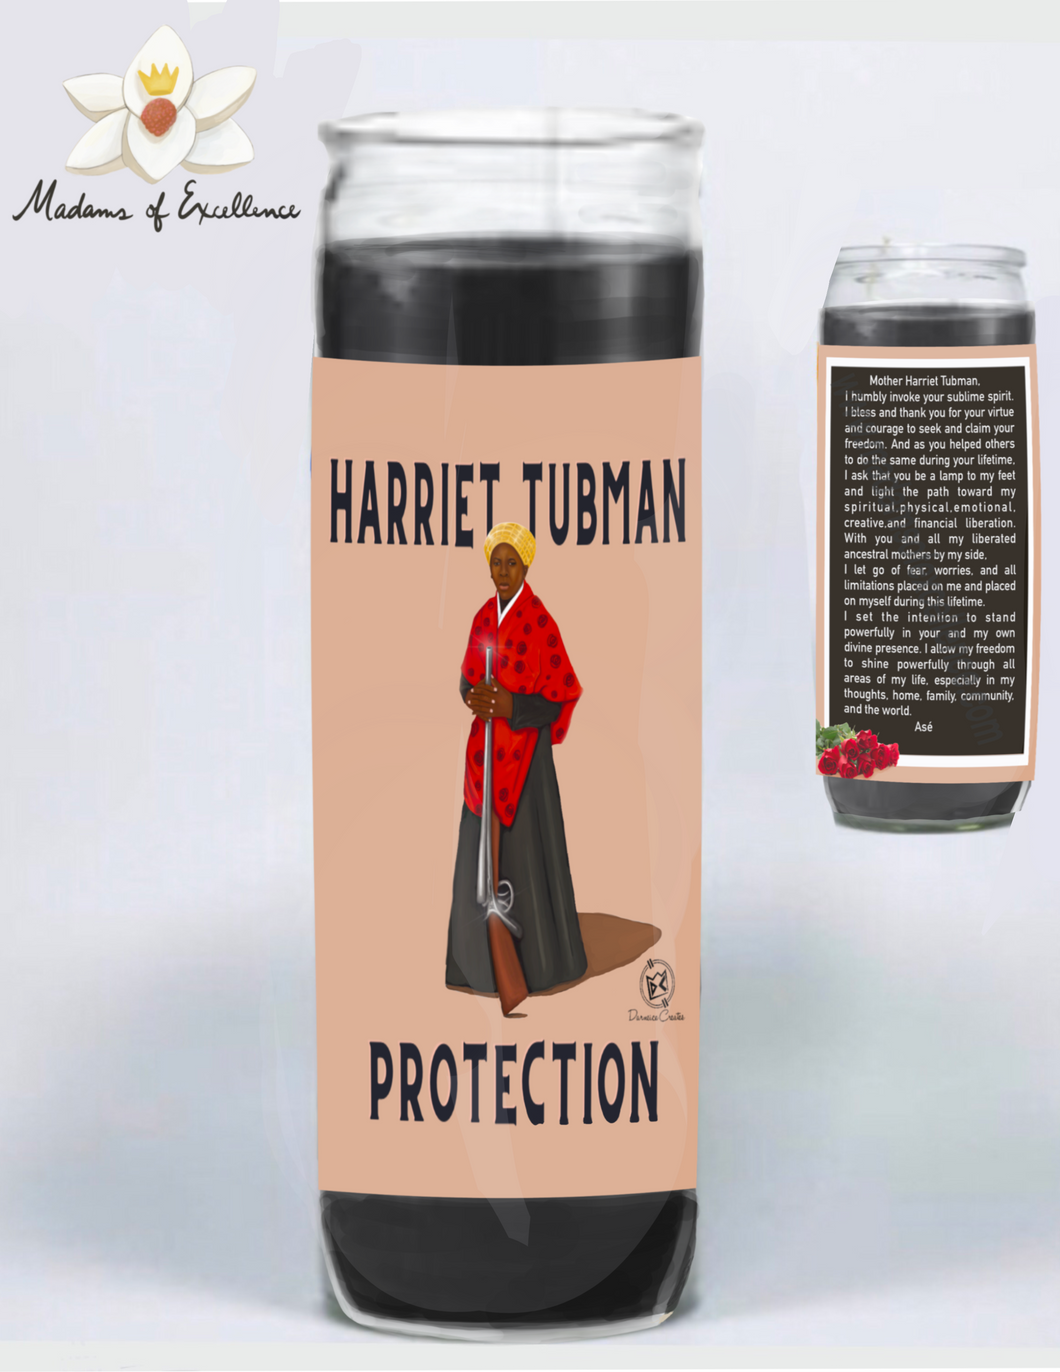 Harriet Tubman Protection Candle